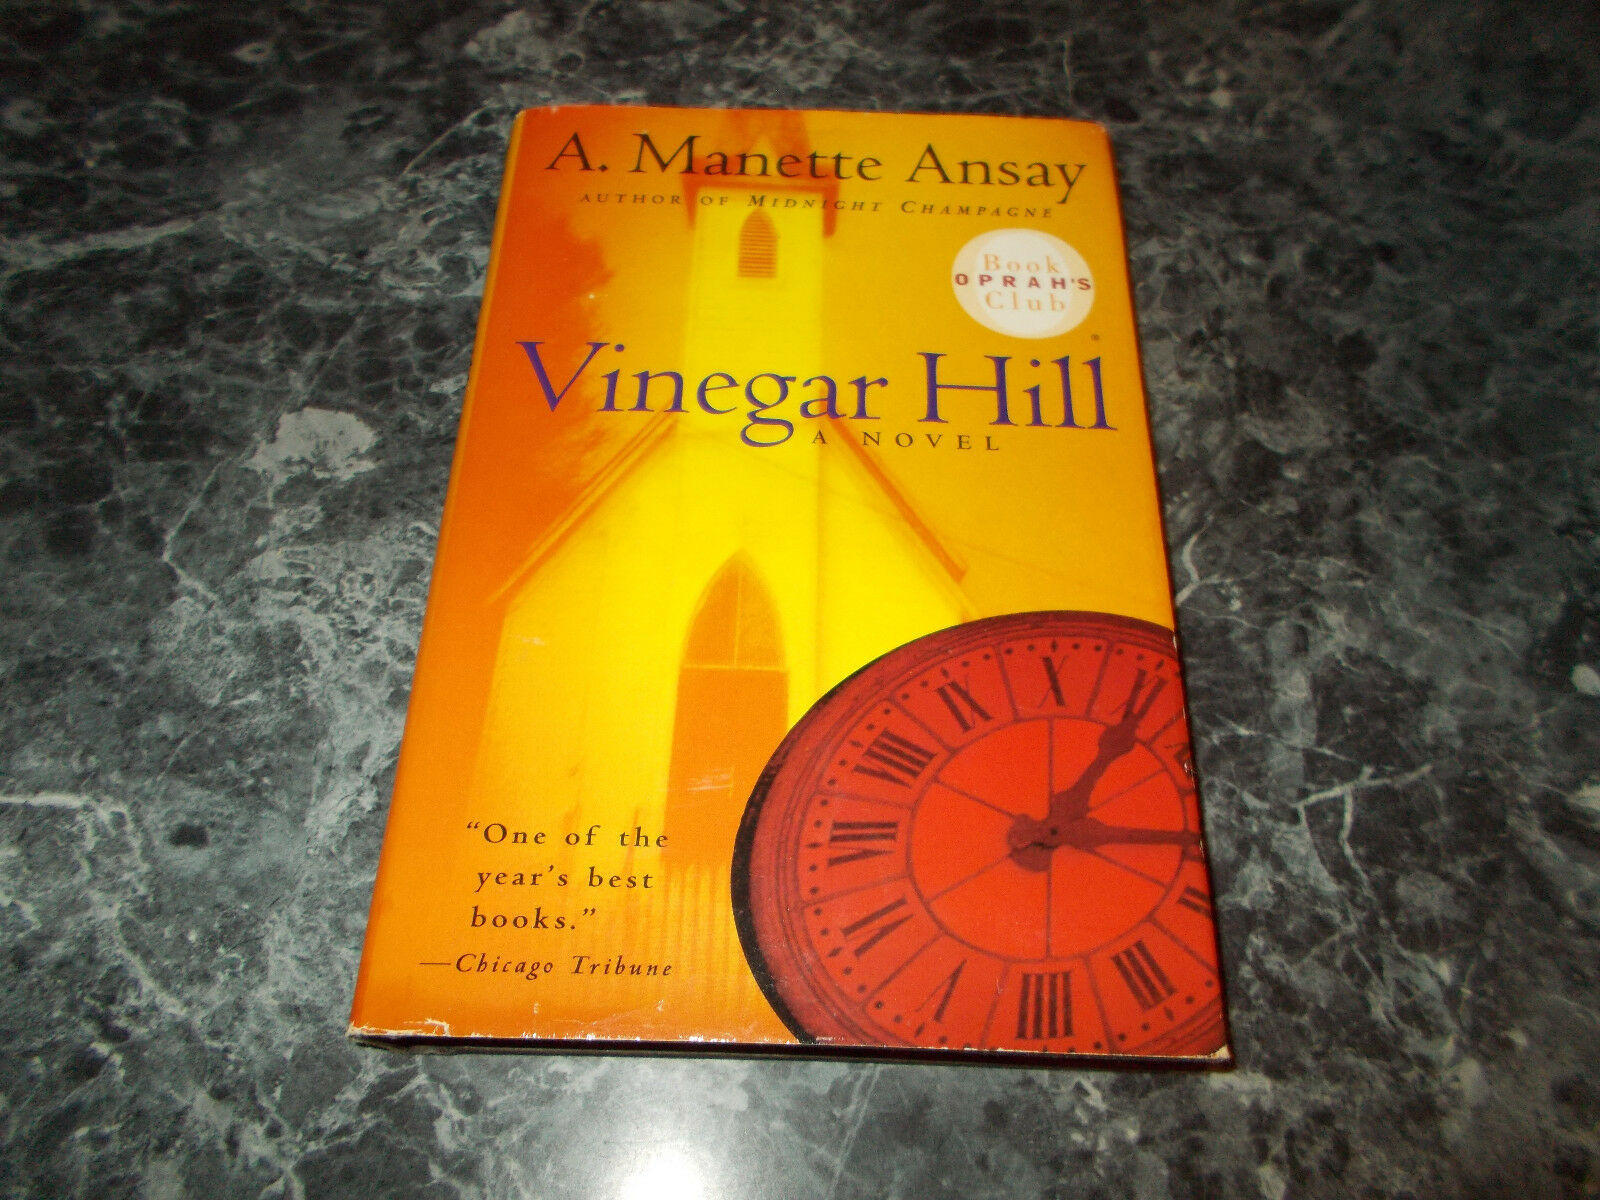 Primary image for Vinegar Hill by A. Manette Ansay (1999, Hardcover)